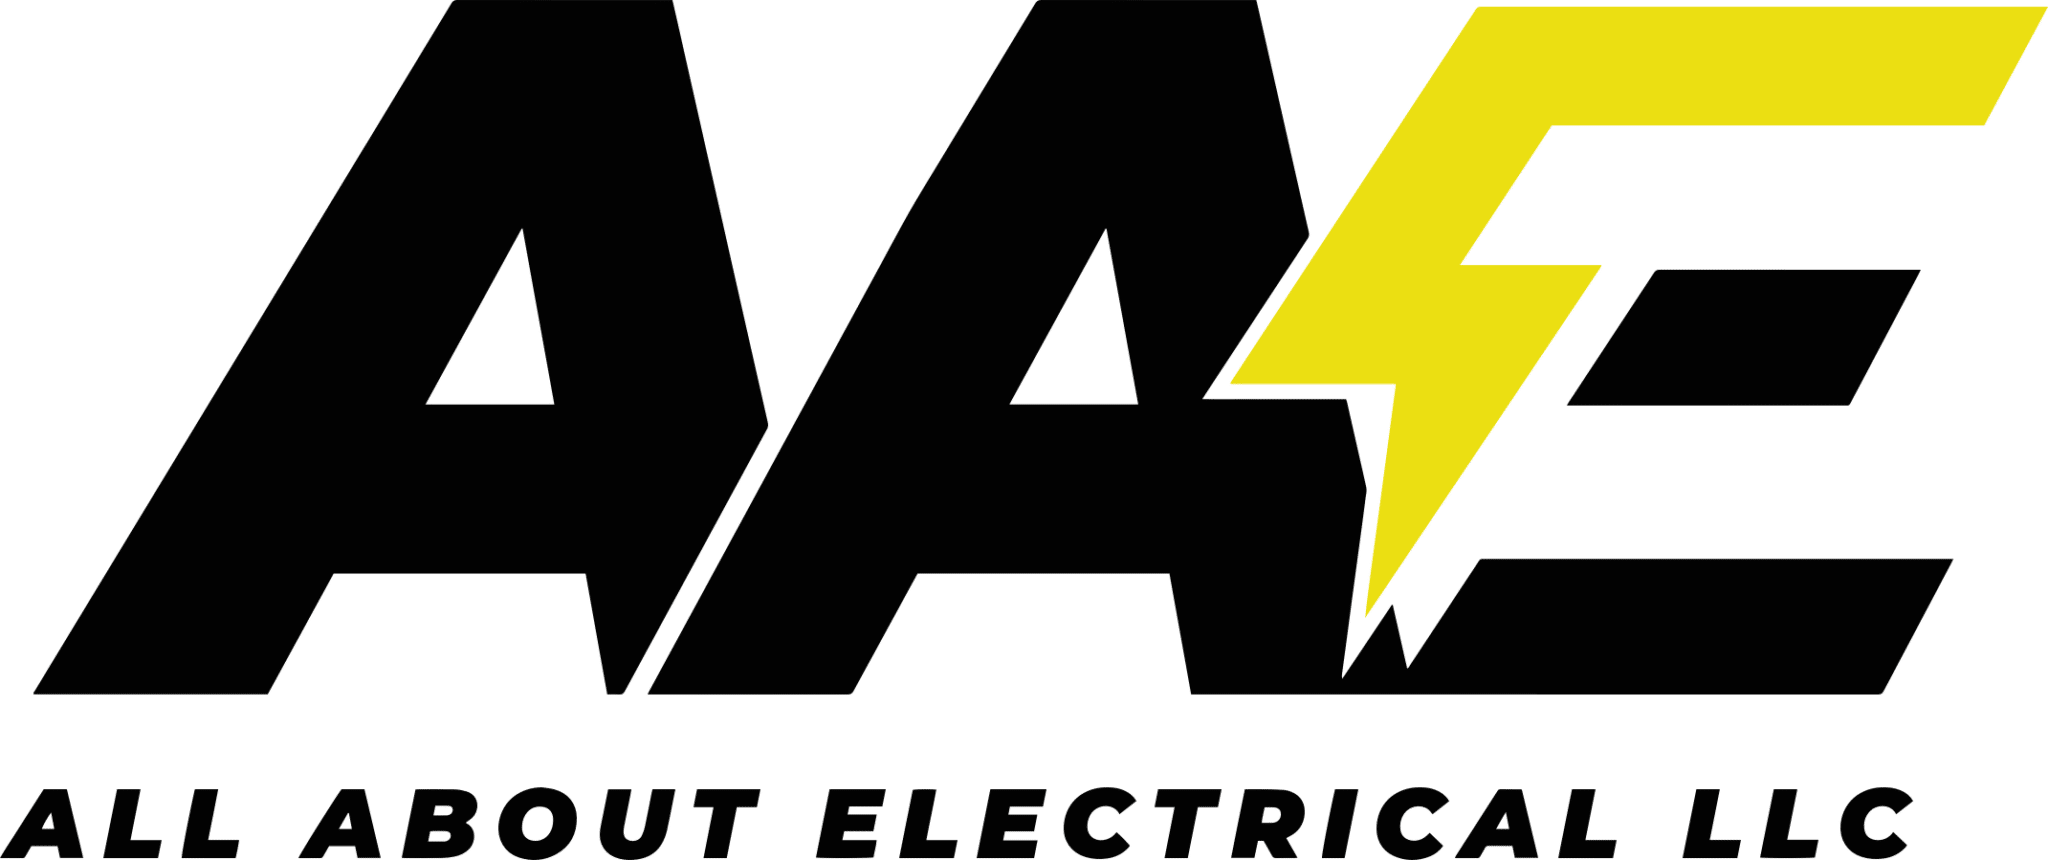 All About Electrical, LLC Logo